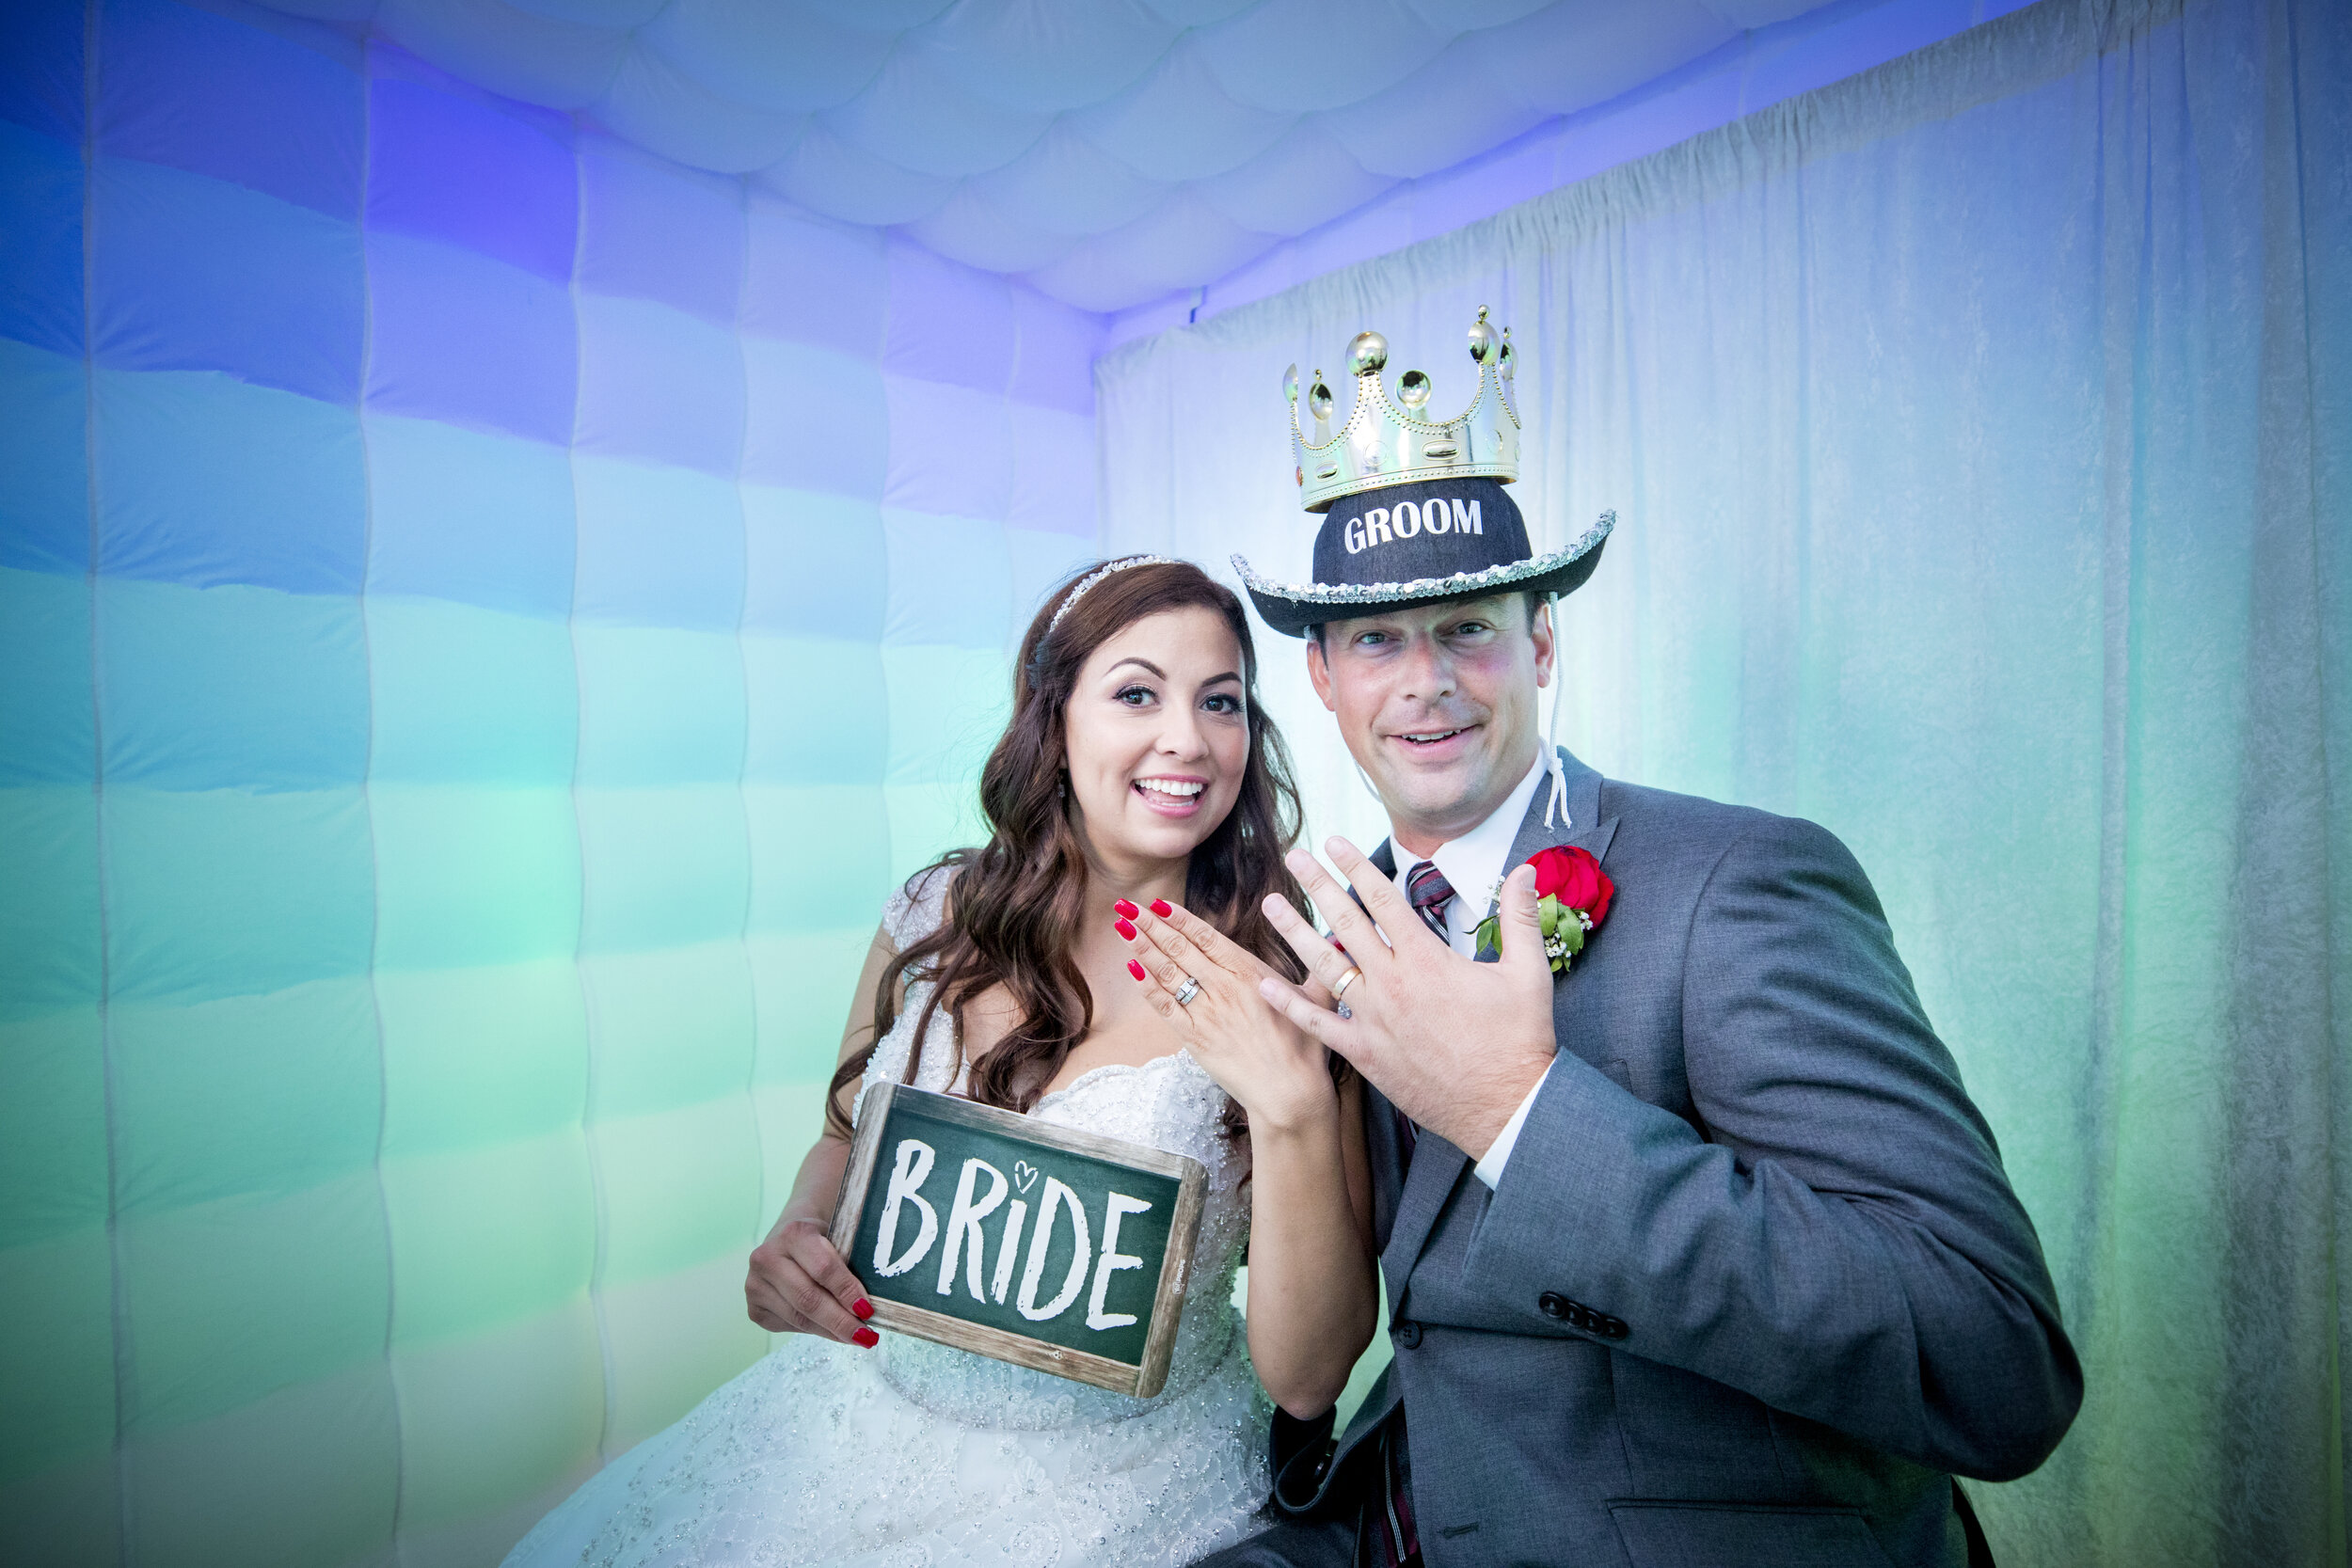 Every wedding is memorable, but capturing these moments with a photo booth, help you keep the memories for a lifetime!